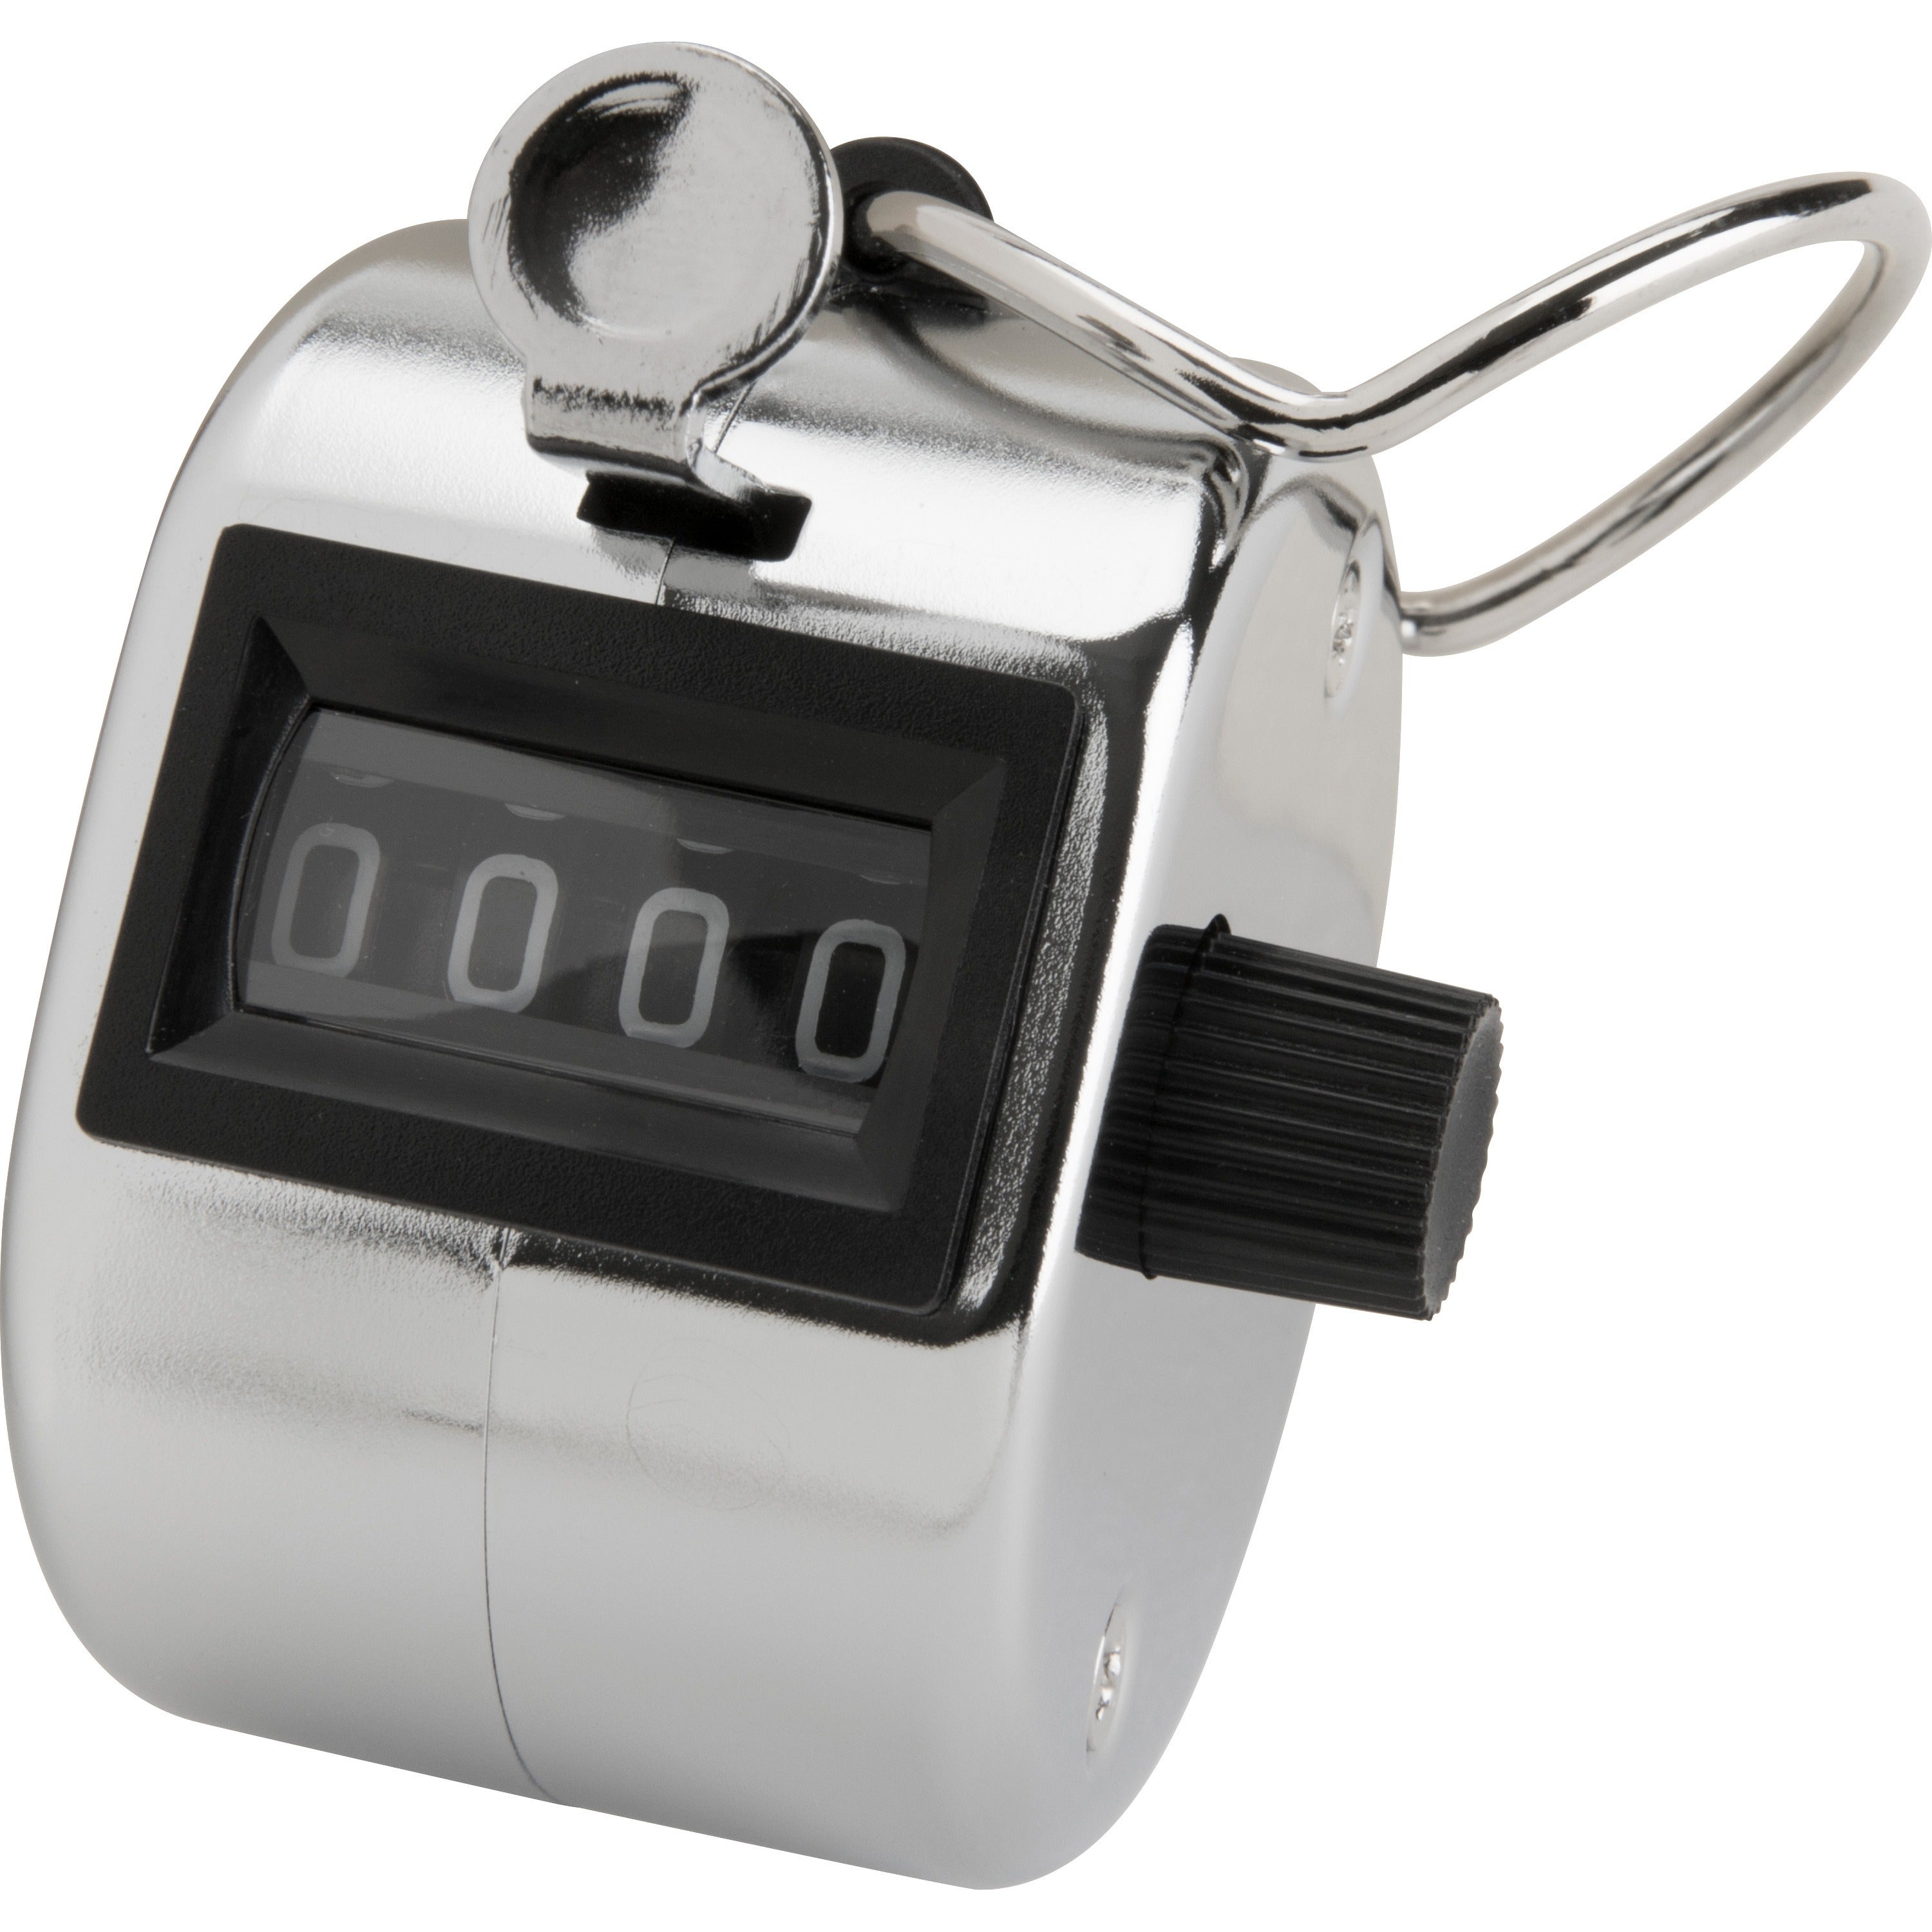 Sparco Finger Ring Tally Counter - 4 Digit - Finger Ring - Handheld - Chrome Plated Steel - Silver - 